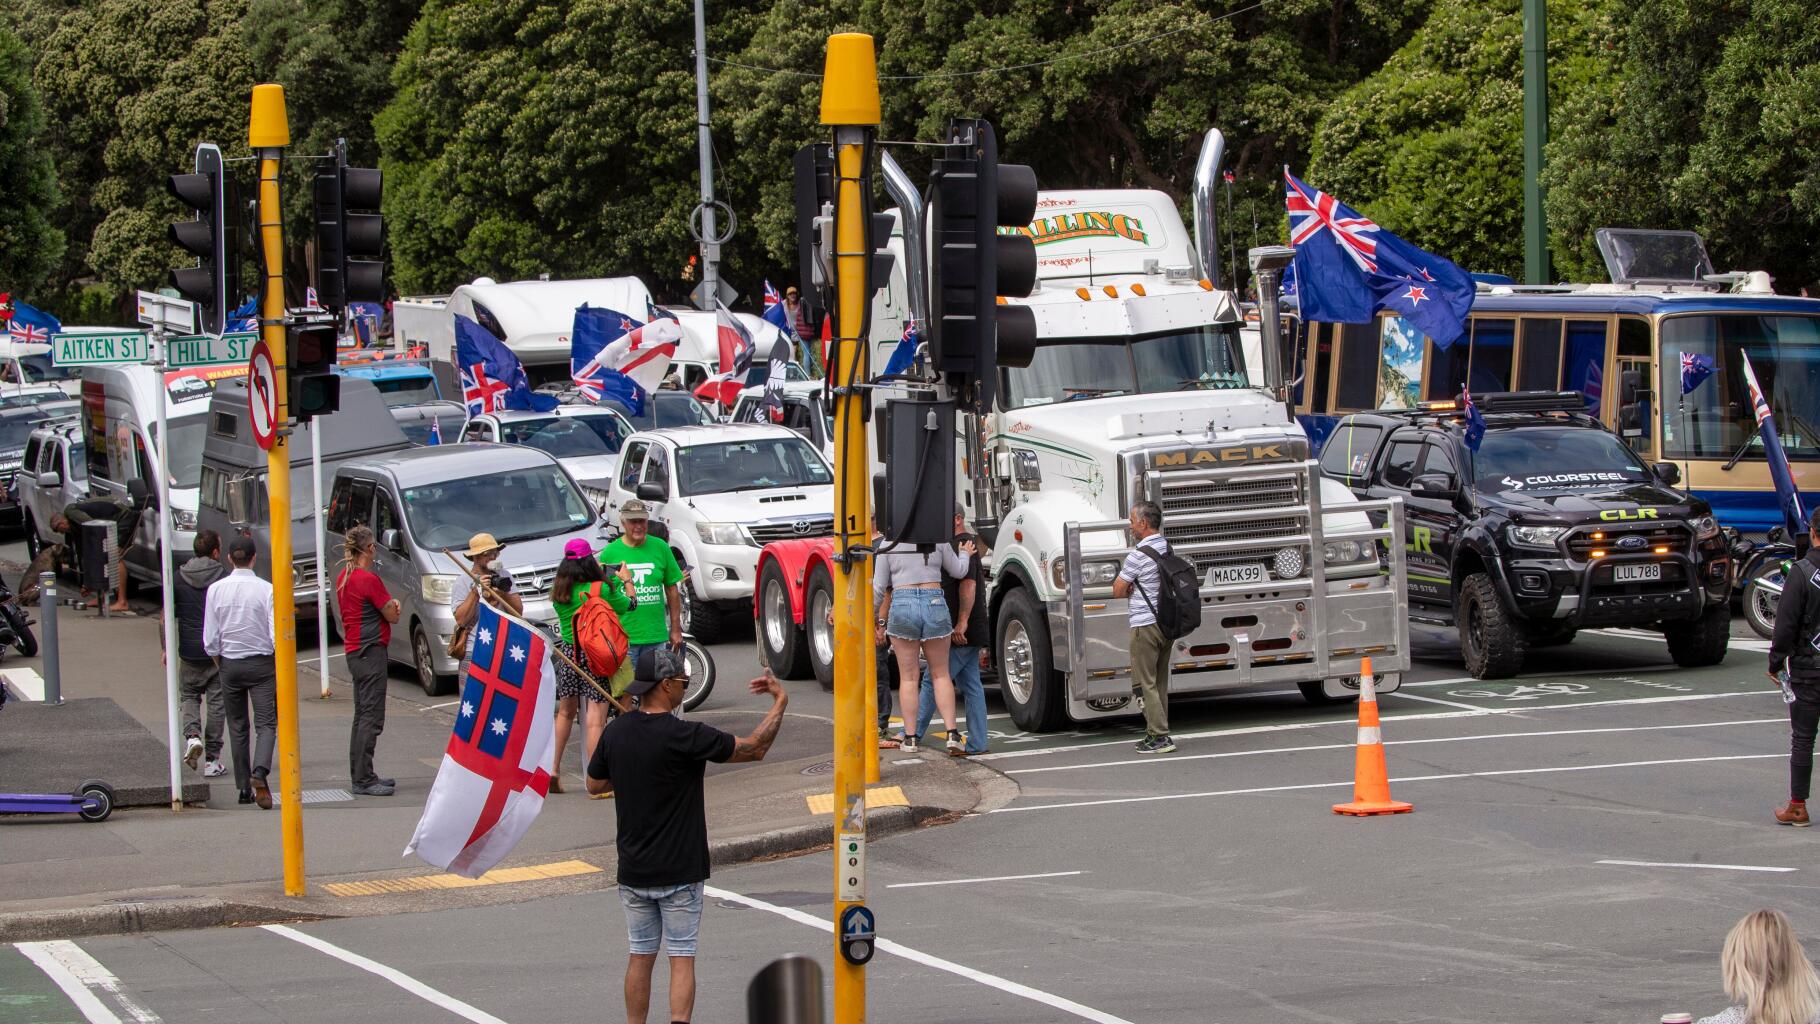 After Canada, the Freedom Caravan took place in New Zealand